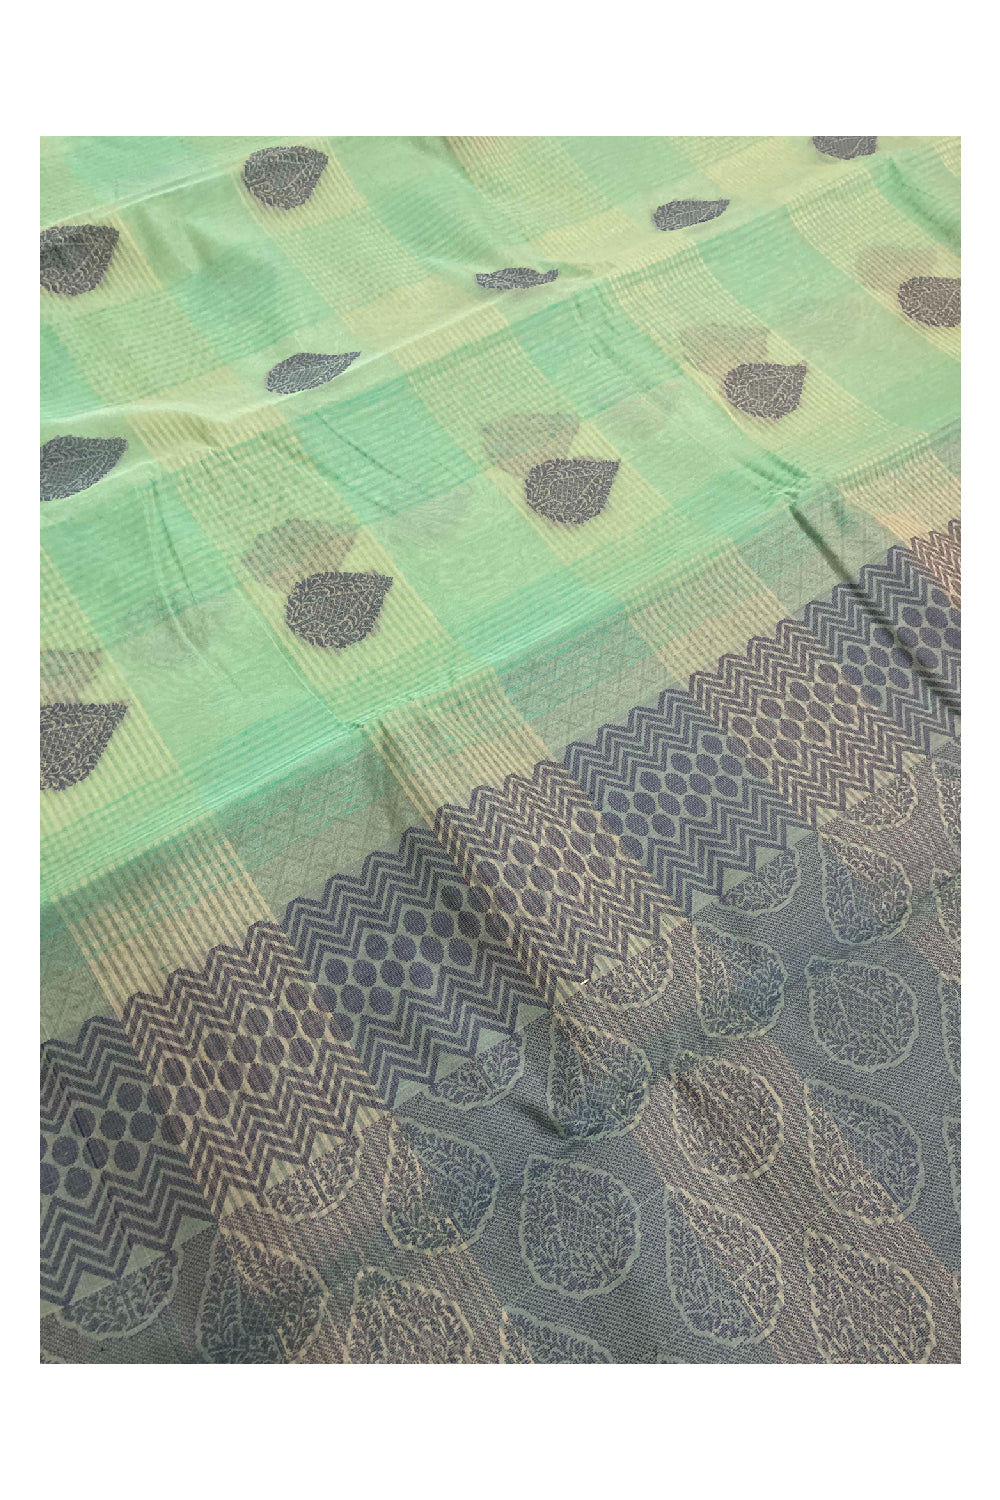 Southloom Sico Gadwal Semi Silk Saree in Turquoise Blue with Floral Motifs (Blouse Piece with Work)